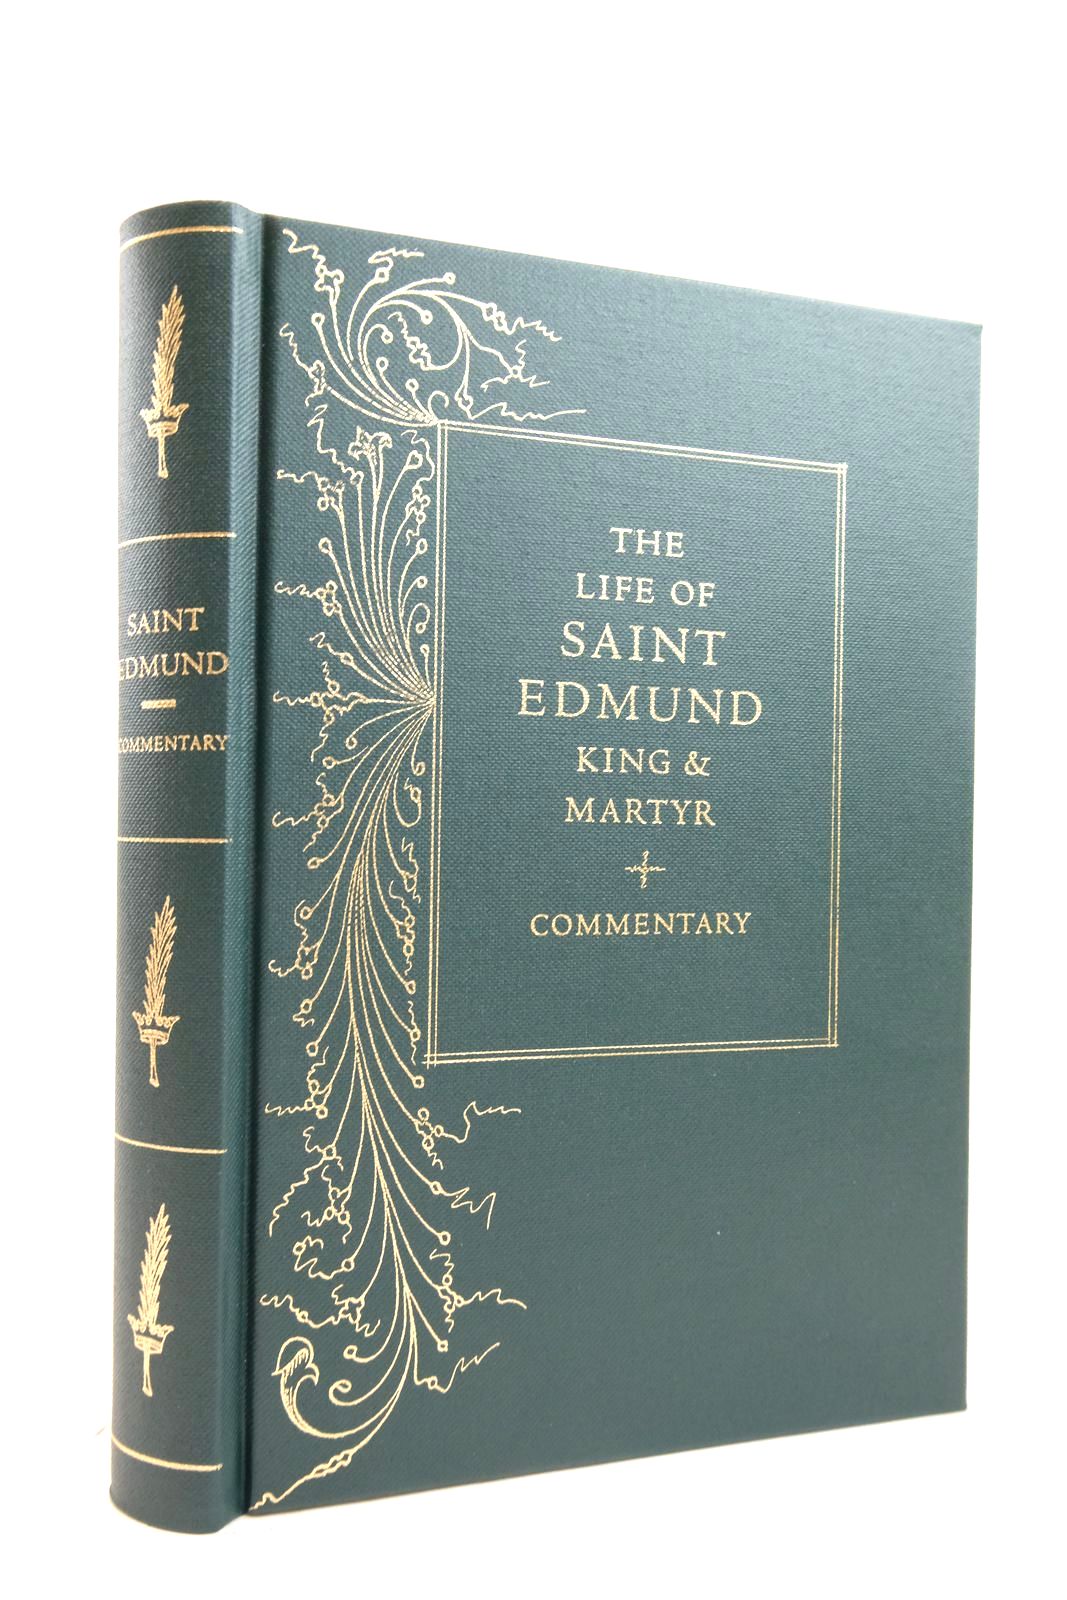 Photo of THE LIFE OF SAINT EDMUND KING & MARTYR written by Lydgate, John
Edwards, A.S.G. published by Folio Society (STOCK CODE: 2134708)  for sale by Stella & Rose's Books